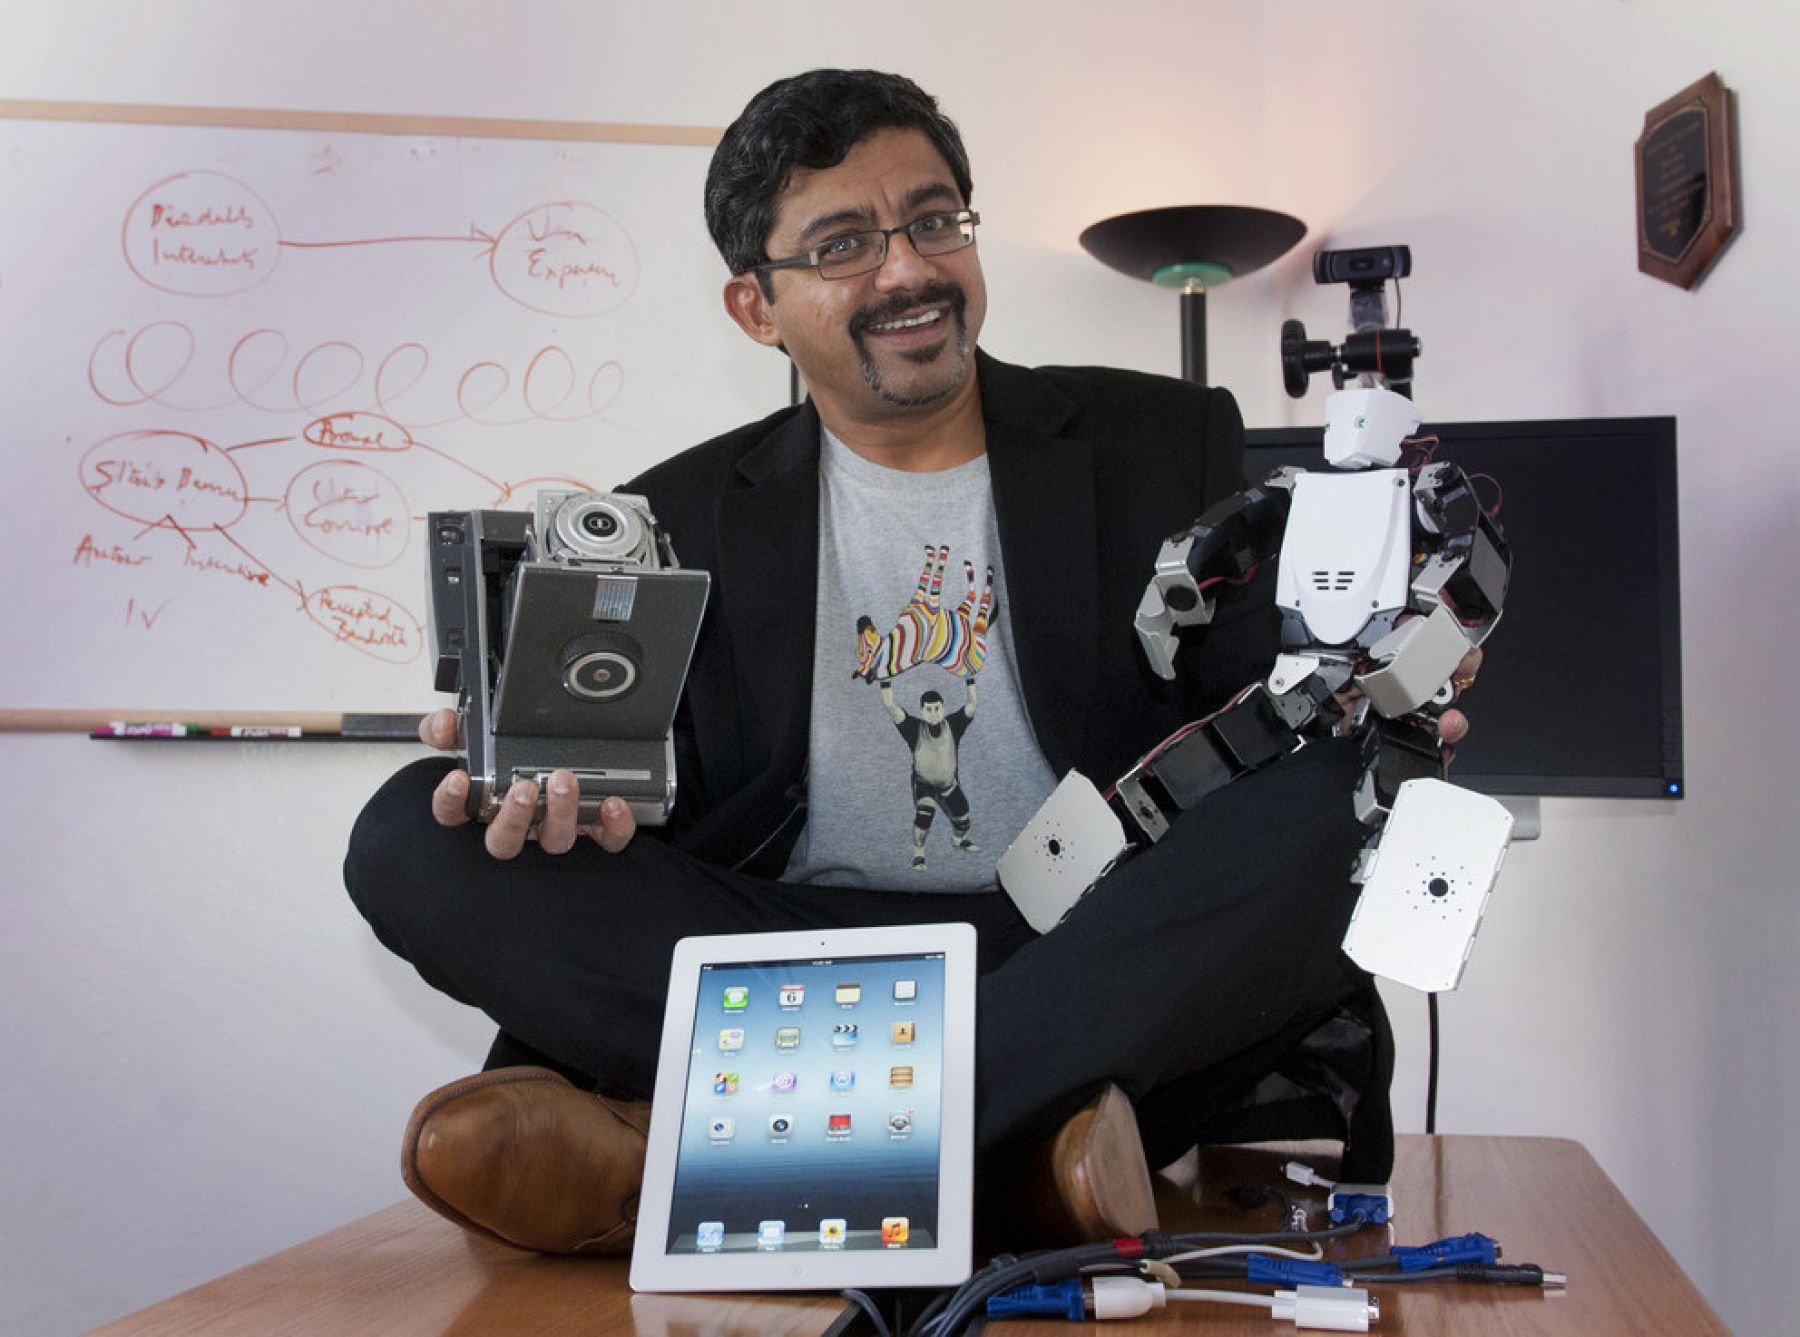 Portrait of S. Shyam Sundar, staged with several gadgets/pieces of technology while seated on desk.